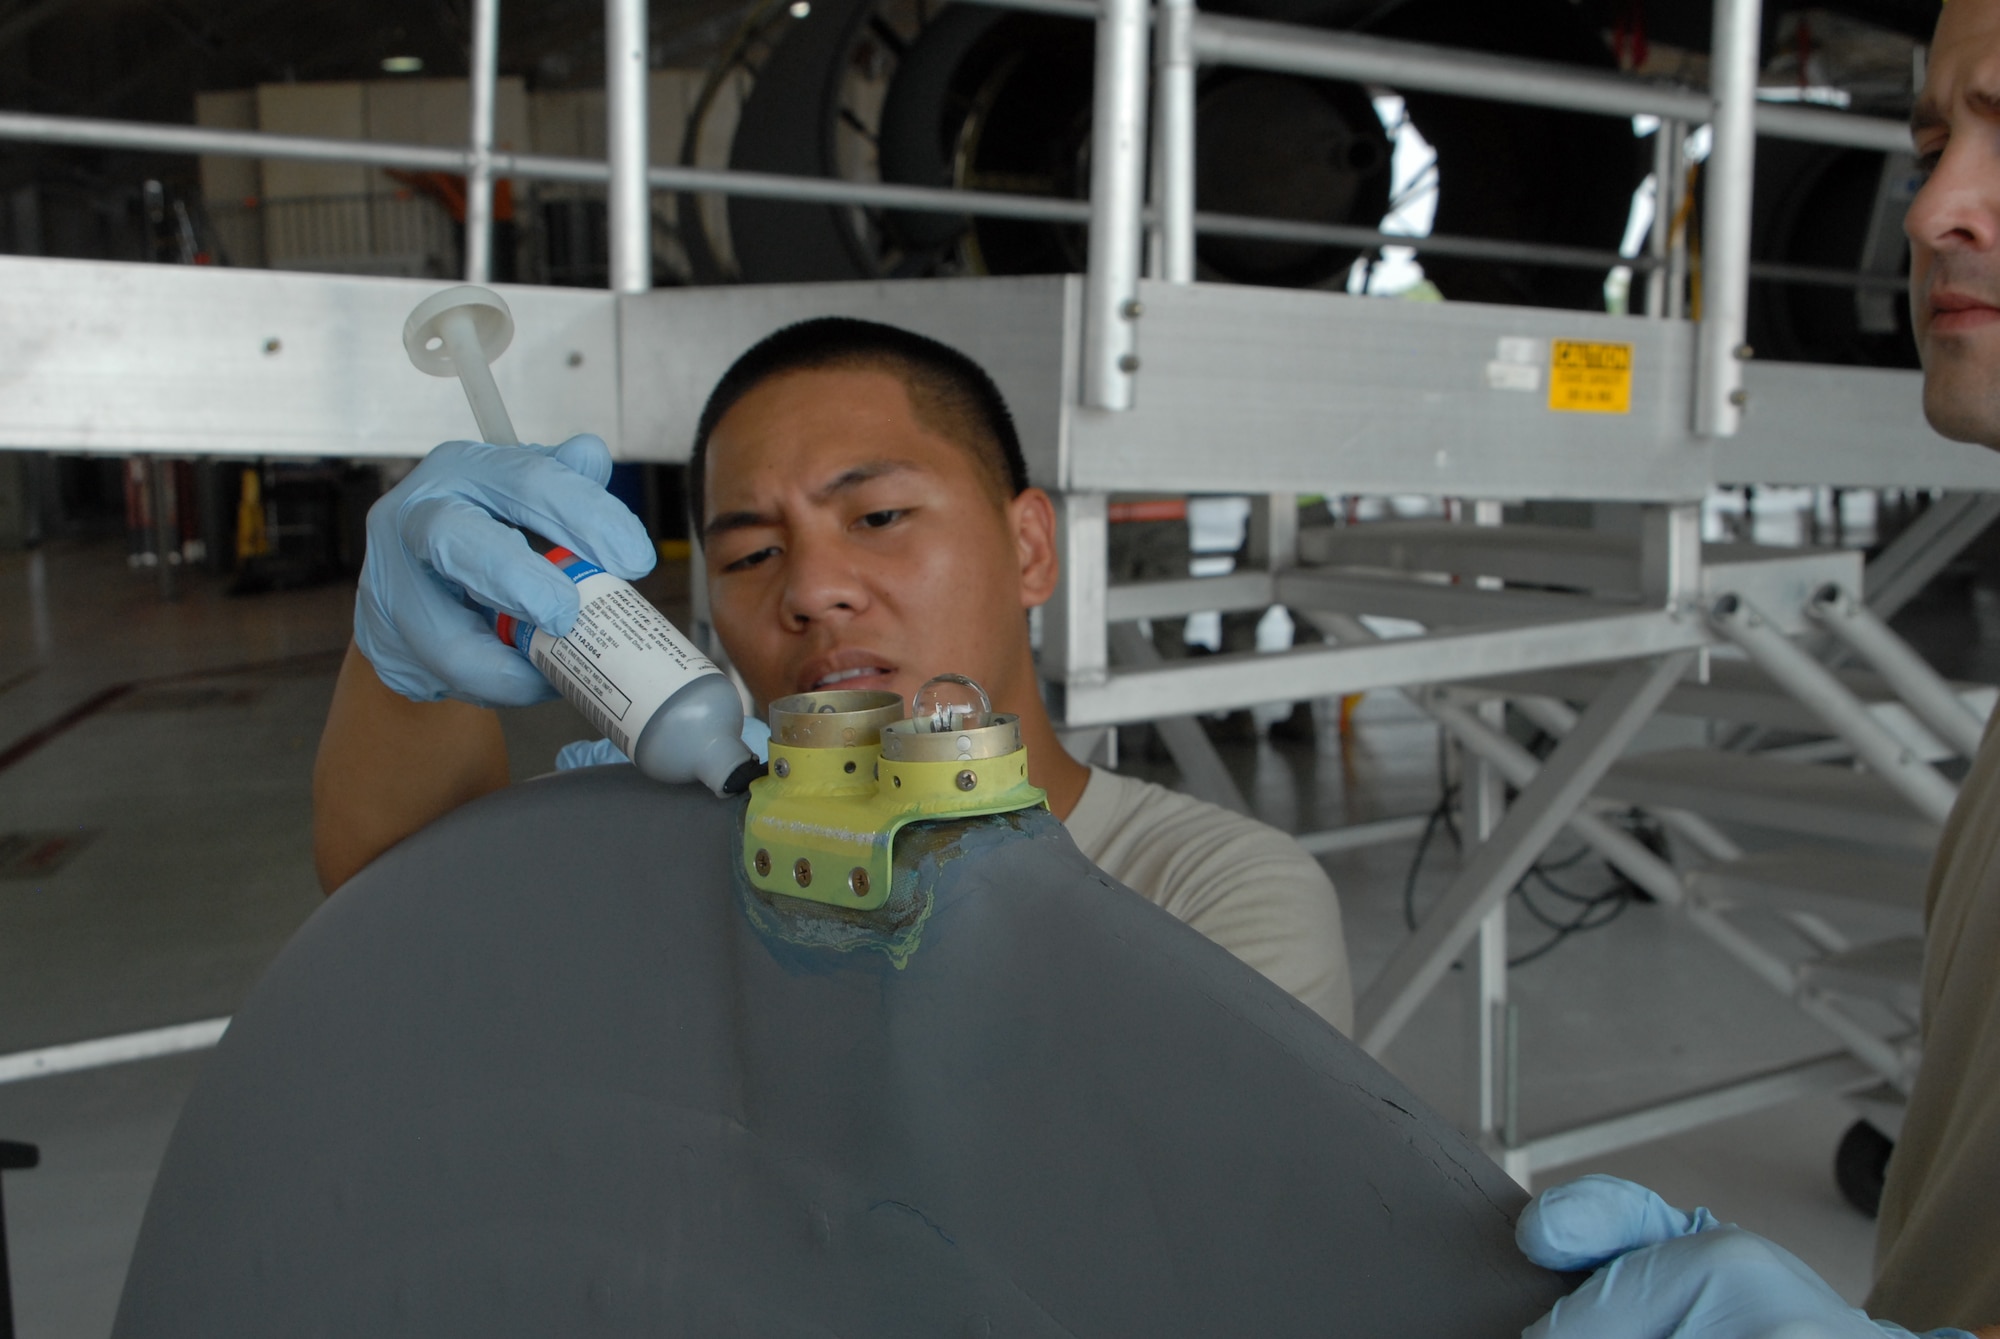 Staff Sgt. Kaohi Kainoa, an Aerospace Maintenance Journeyman, replaces the
navigational light bracket on the end of KC-135R tail cone at Scott AFB,
Ill. on June 6, 2011. Staff Sgt. Kainoa is assigned to the 906th Air
Refueling Squadron which is associated with the 126th Air Refueling Wing,
Illinois Air National Guard. (U.S. Air Force photo by Airman 1st Class
Dustin Clary)